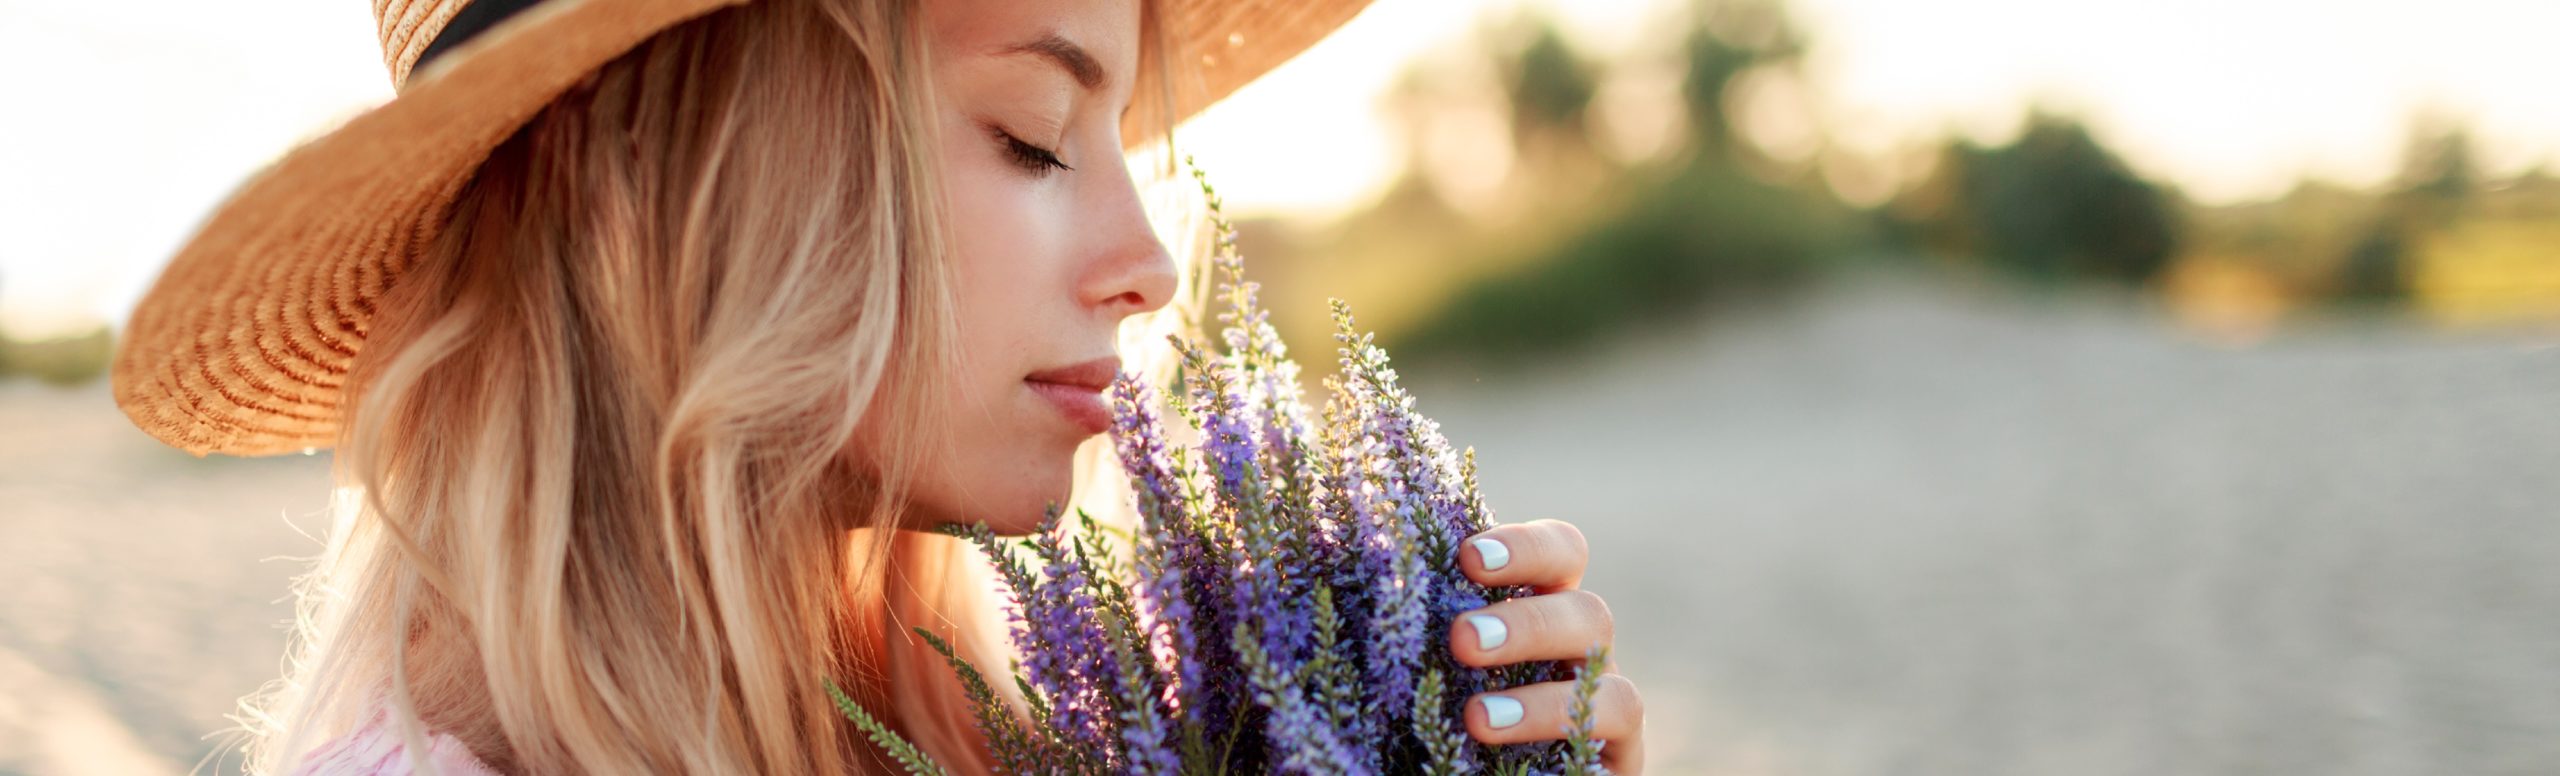 Essential Oils Connect to Mother Nature’s Greatest Gifts, While Connecting Mind, Body, & Spirit